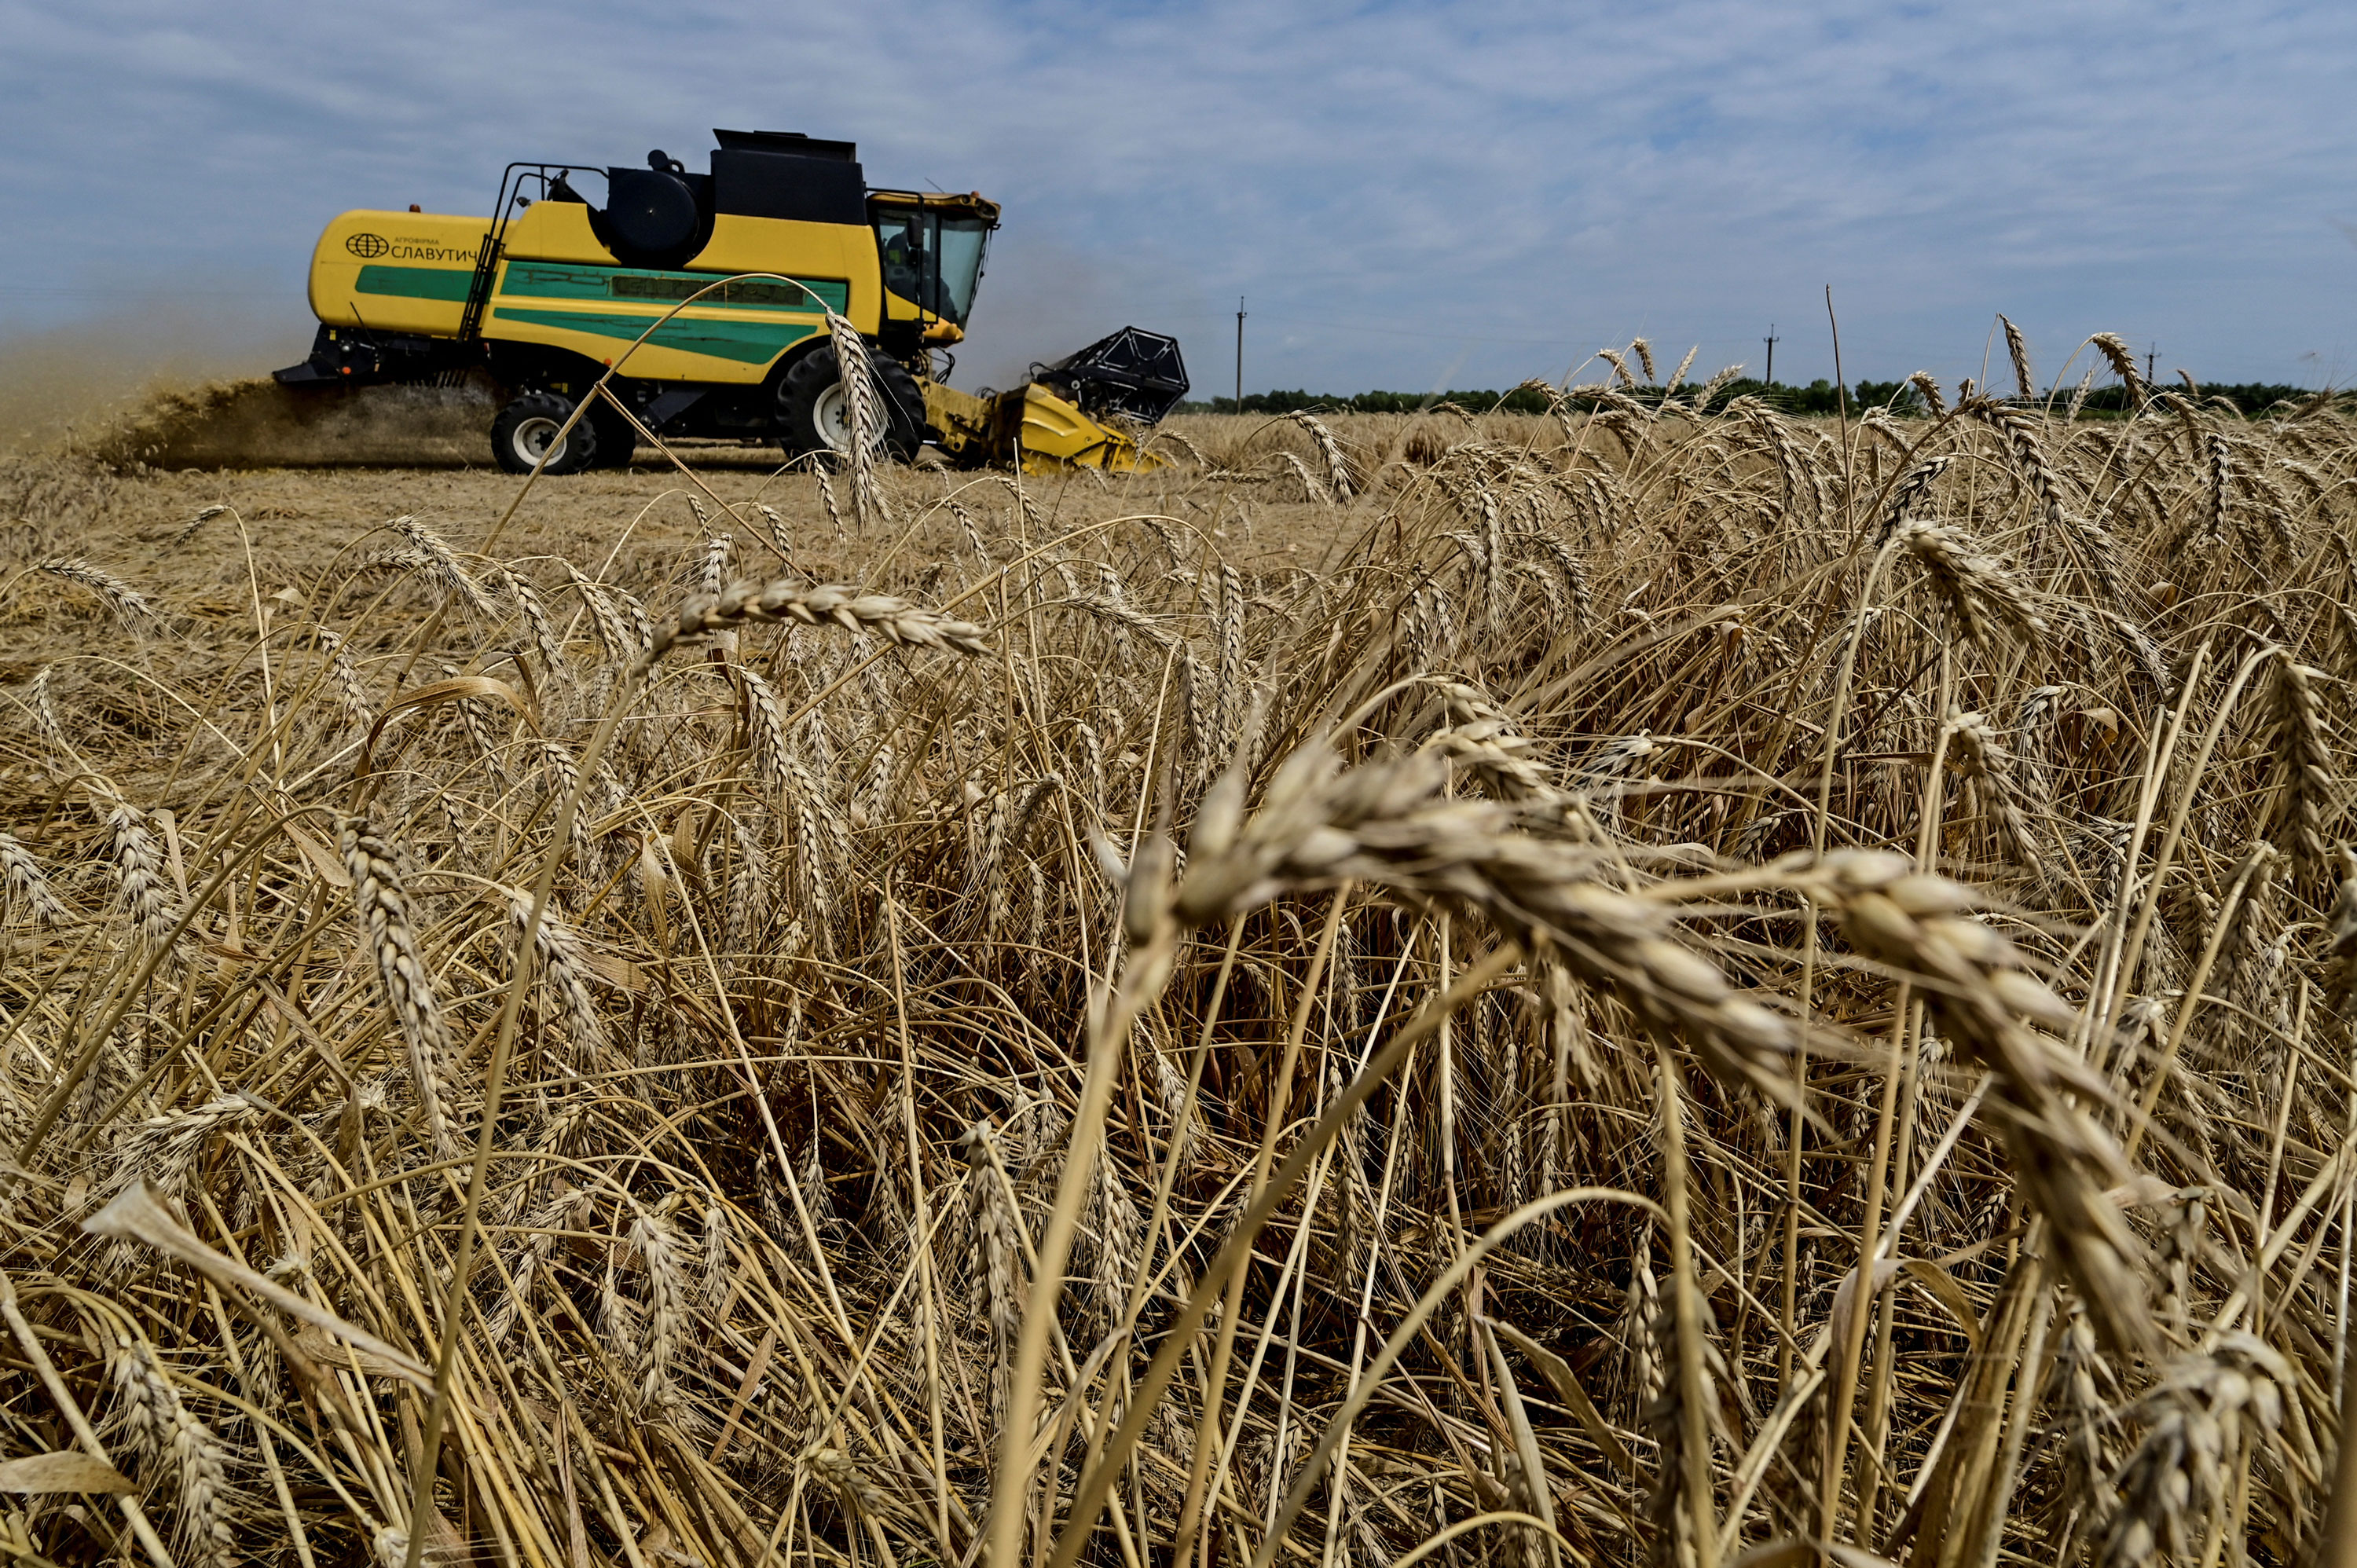 An agricultural worker operates a combine during a wheat harvesting in a field in Zaporizhzhia region, Ukraine, on July 14, 2023.